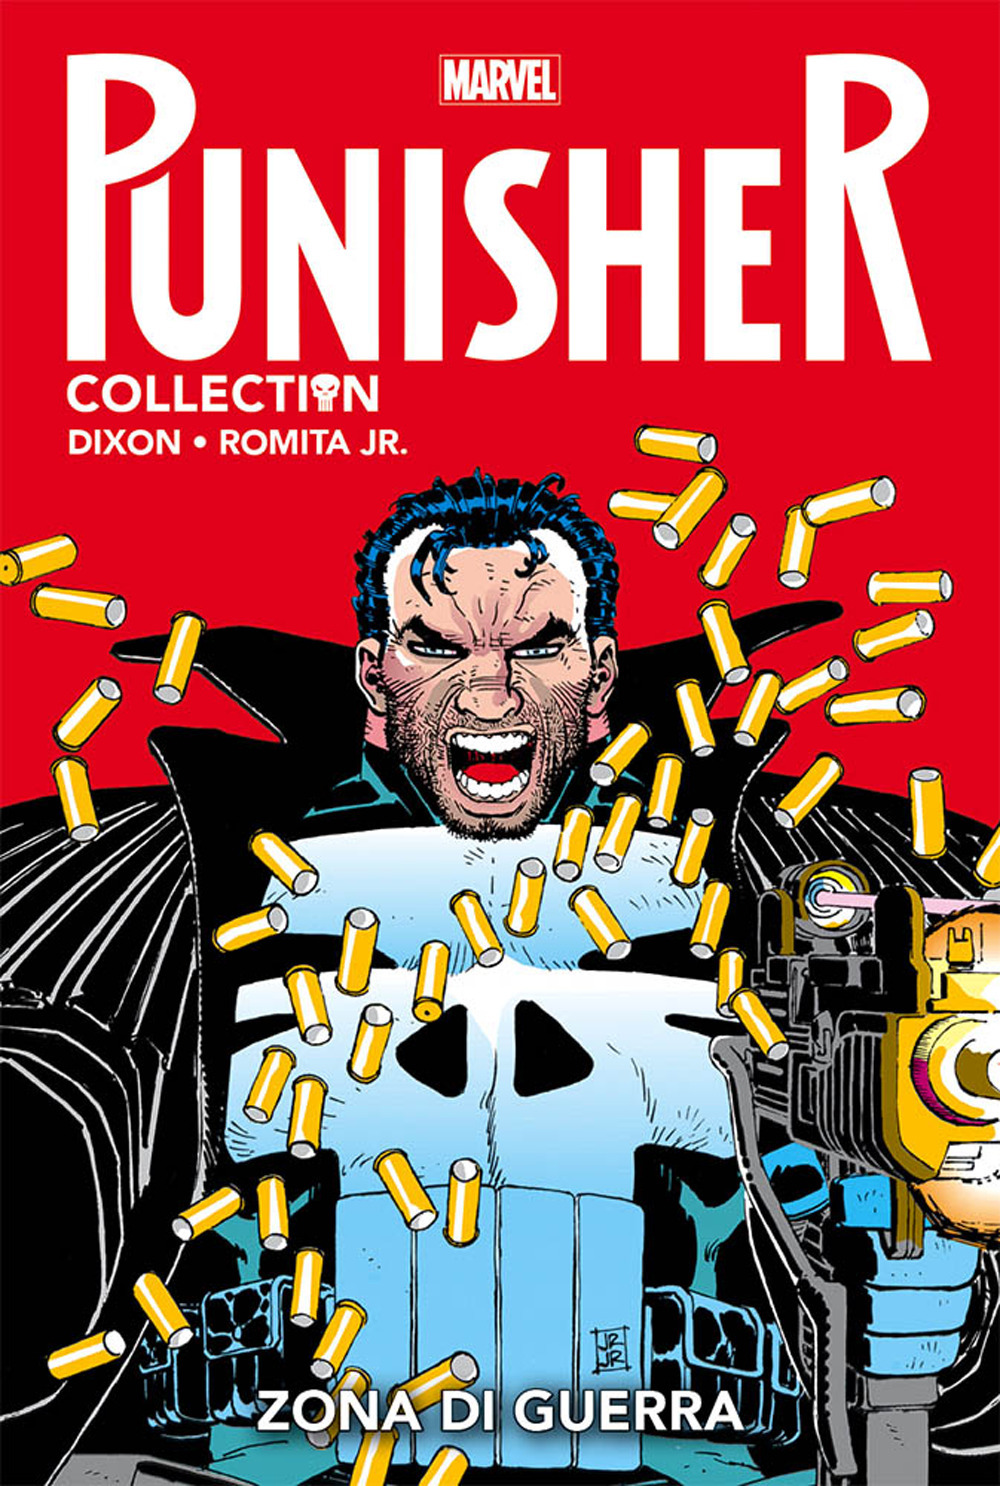 Zona di guerra. Punisher collection. Vol. 6